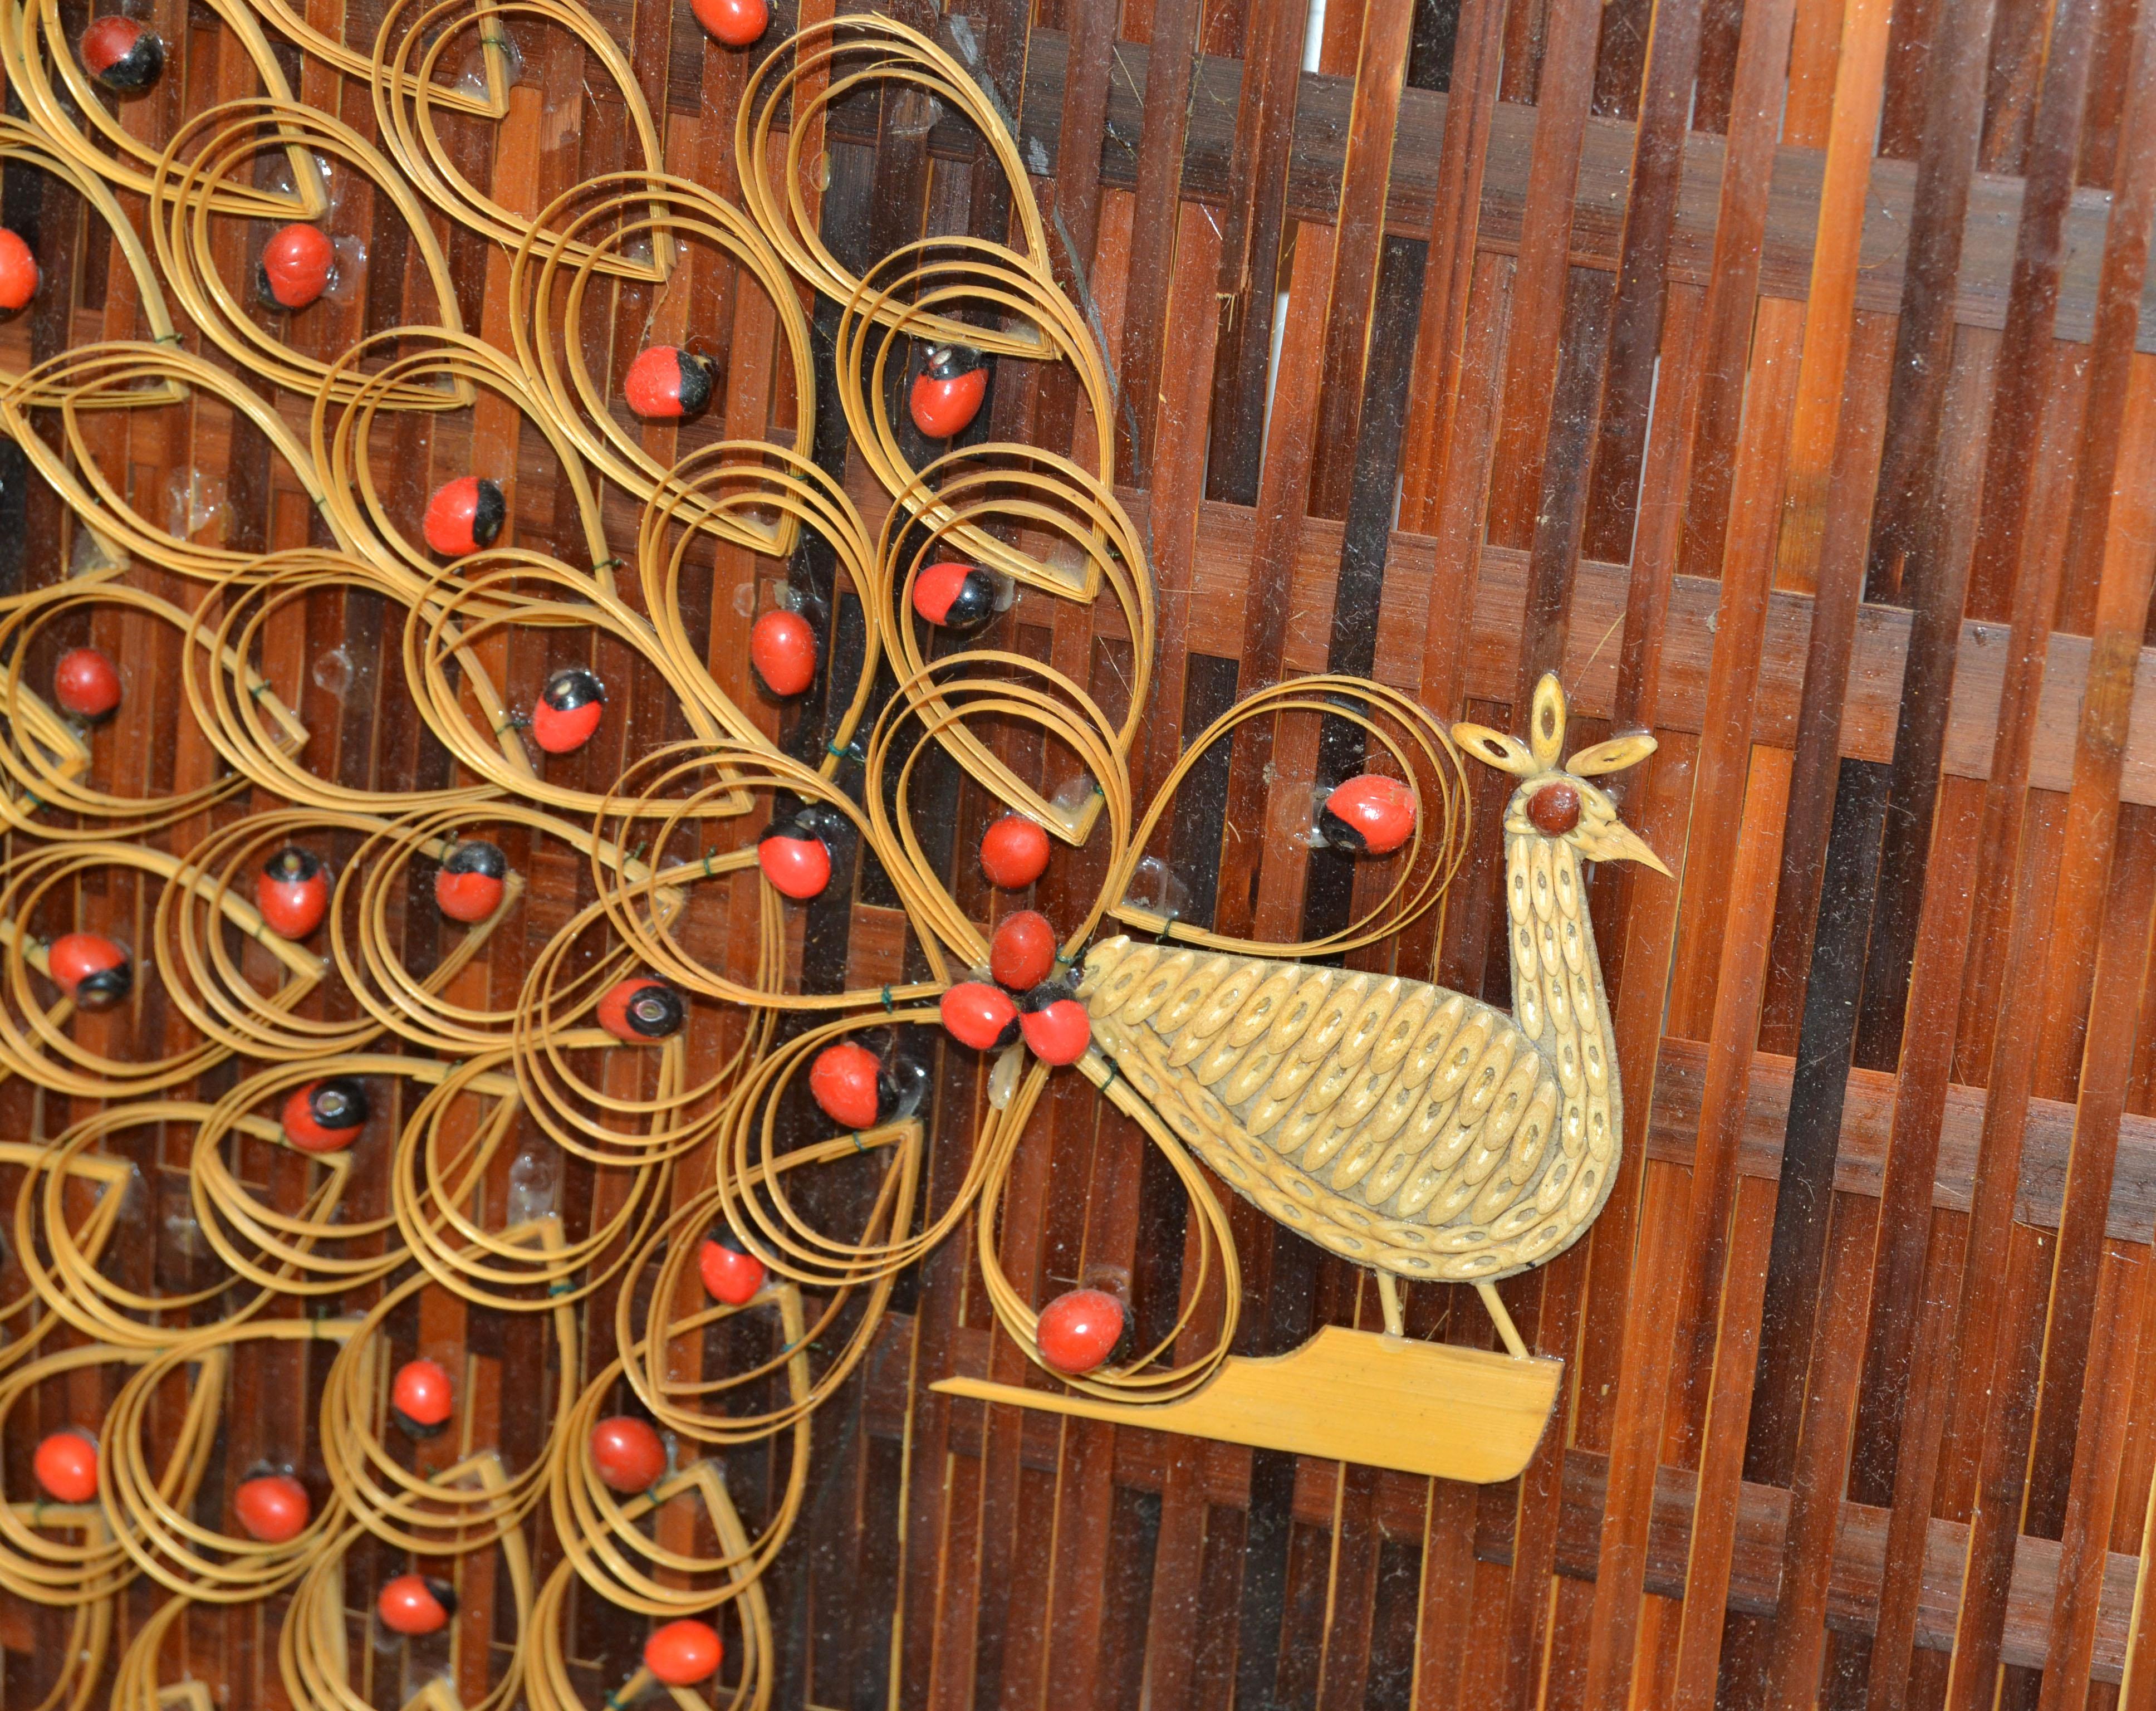 Hand-Woven 3 Nesting Decorative Handcrafted Cane & Rattan Beaded Wall Plates Peacock Motif For Sale